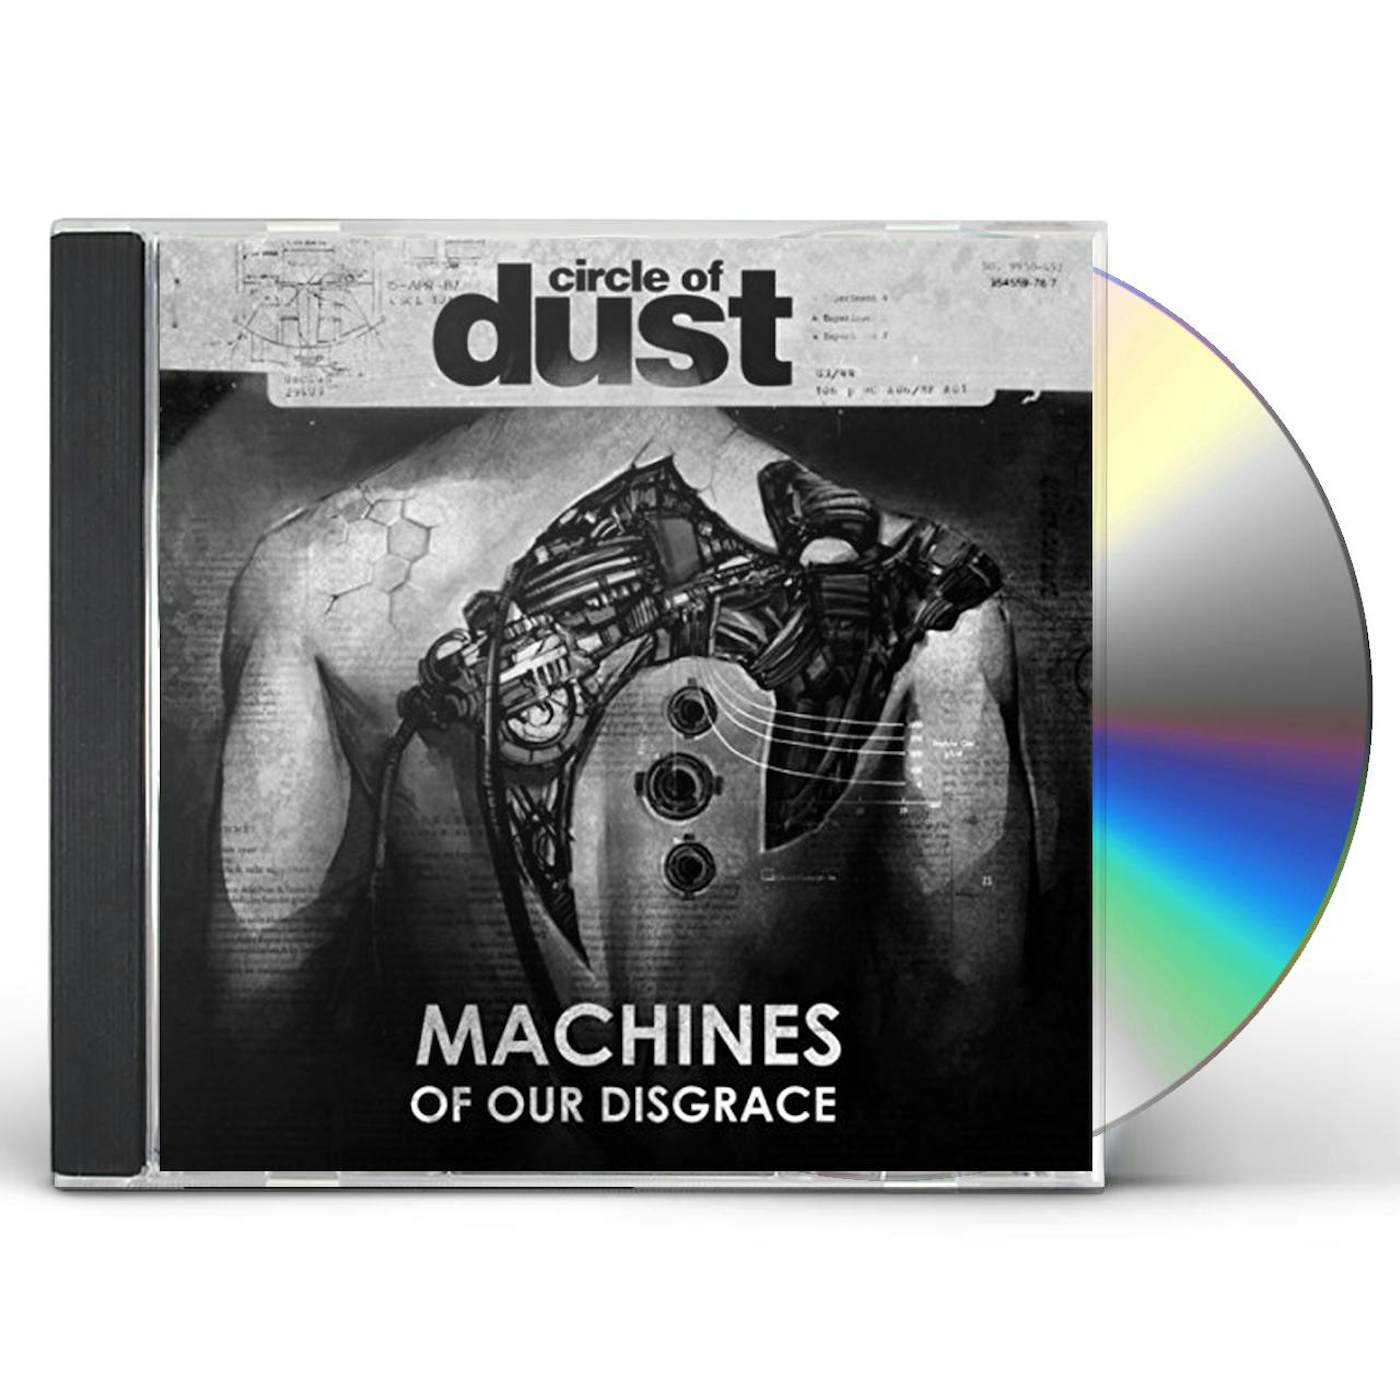 Circle of Dust MACHINES OF OUR DISGRACE CD